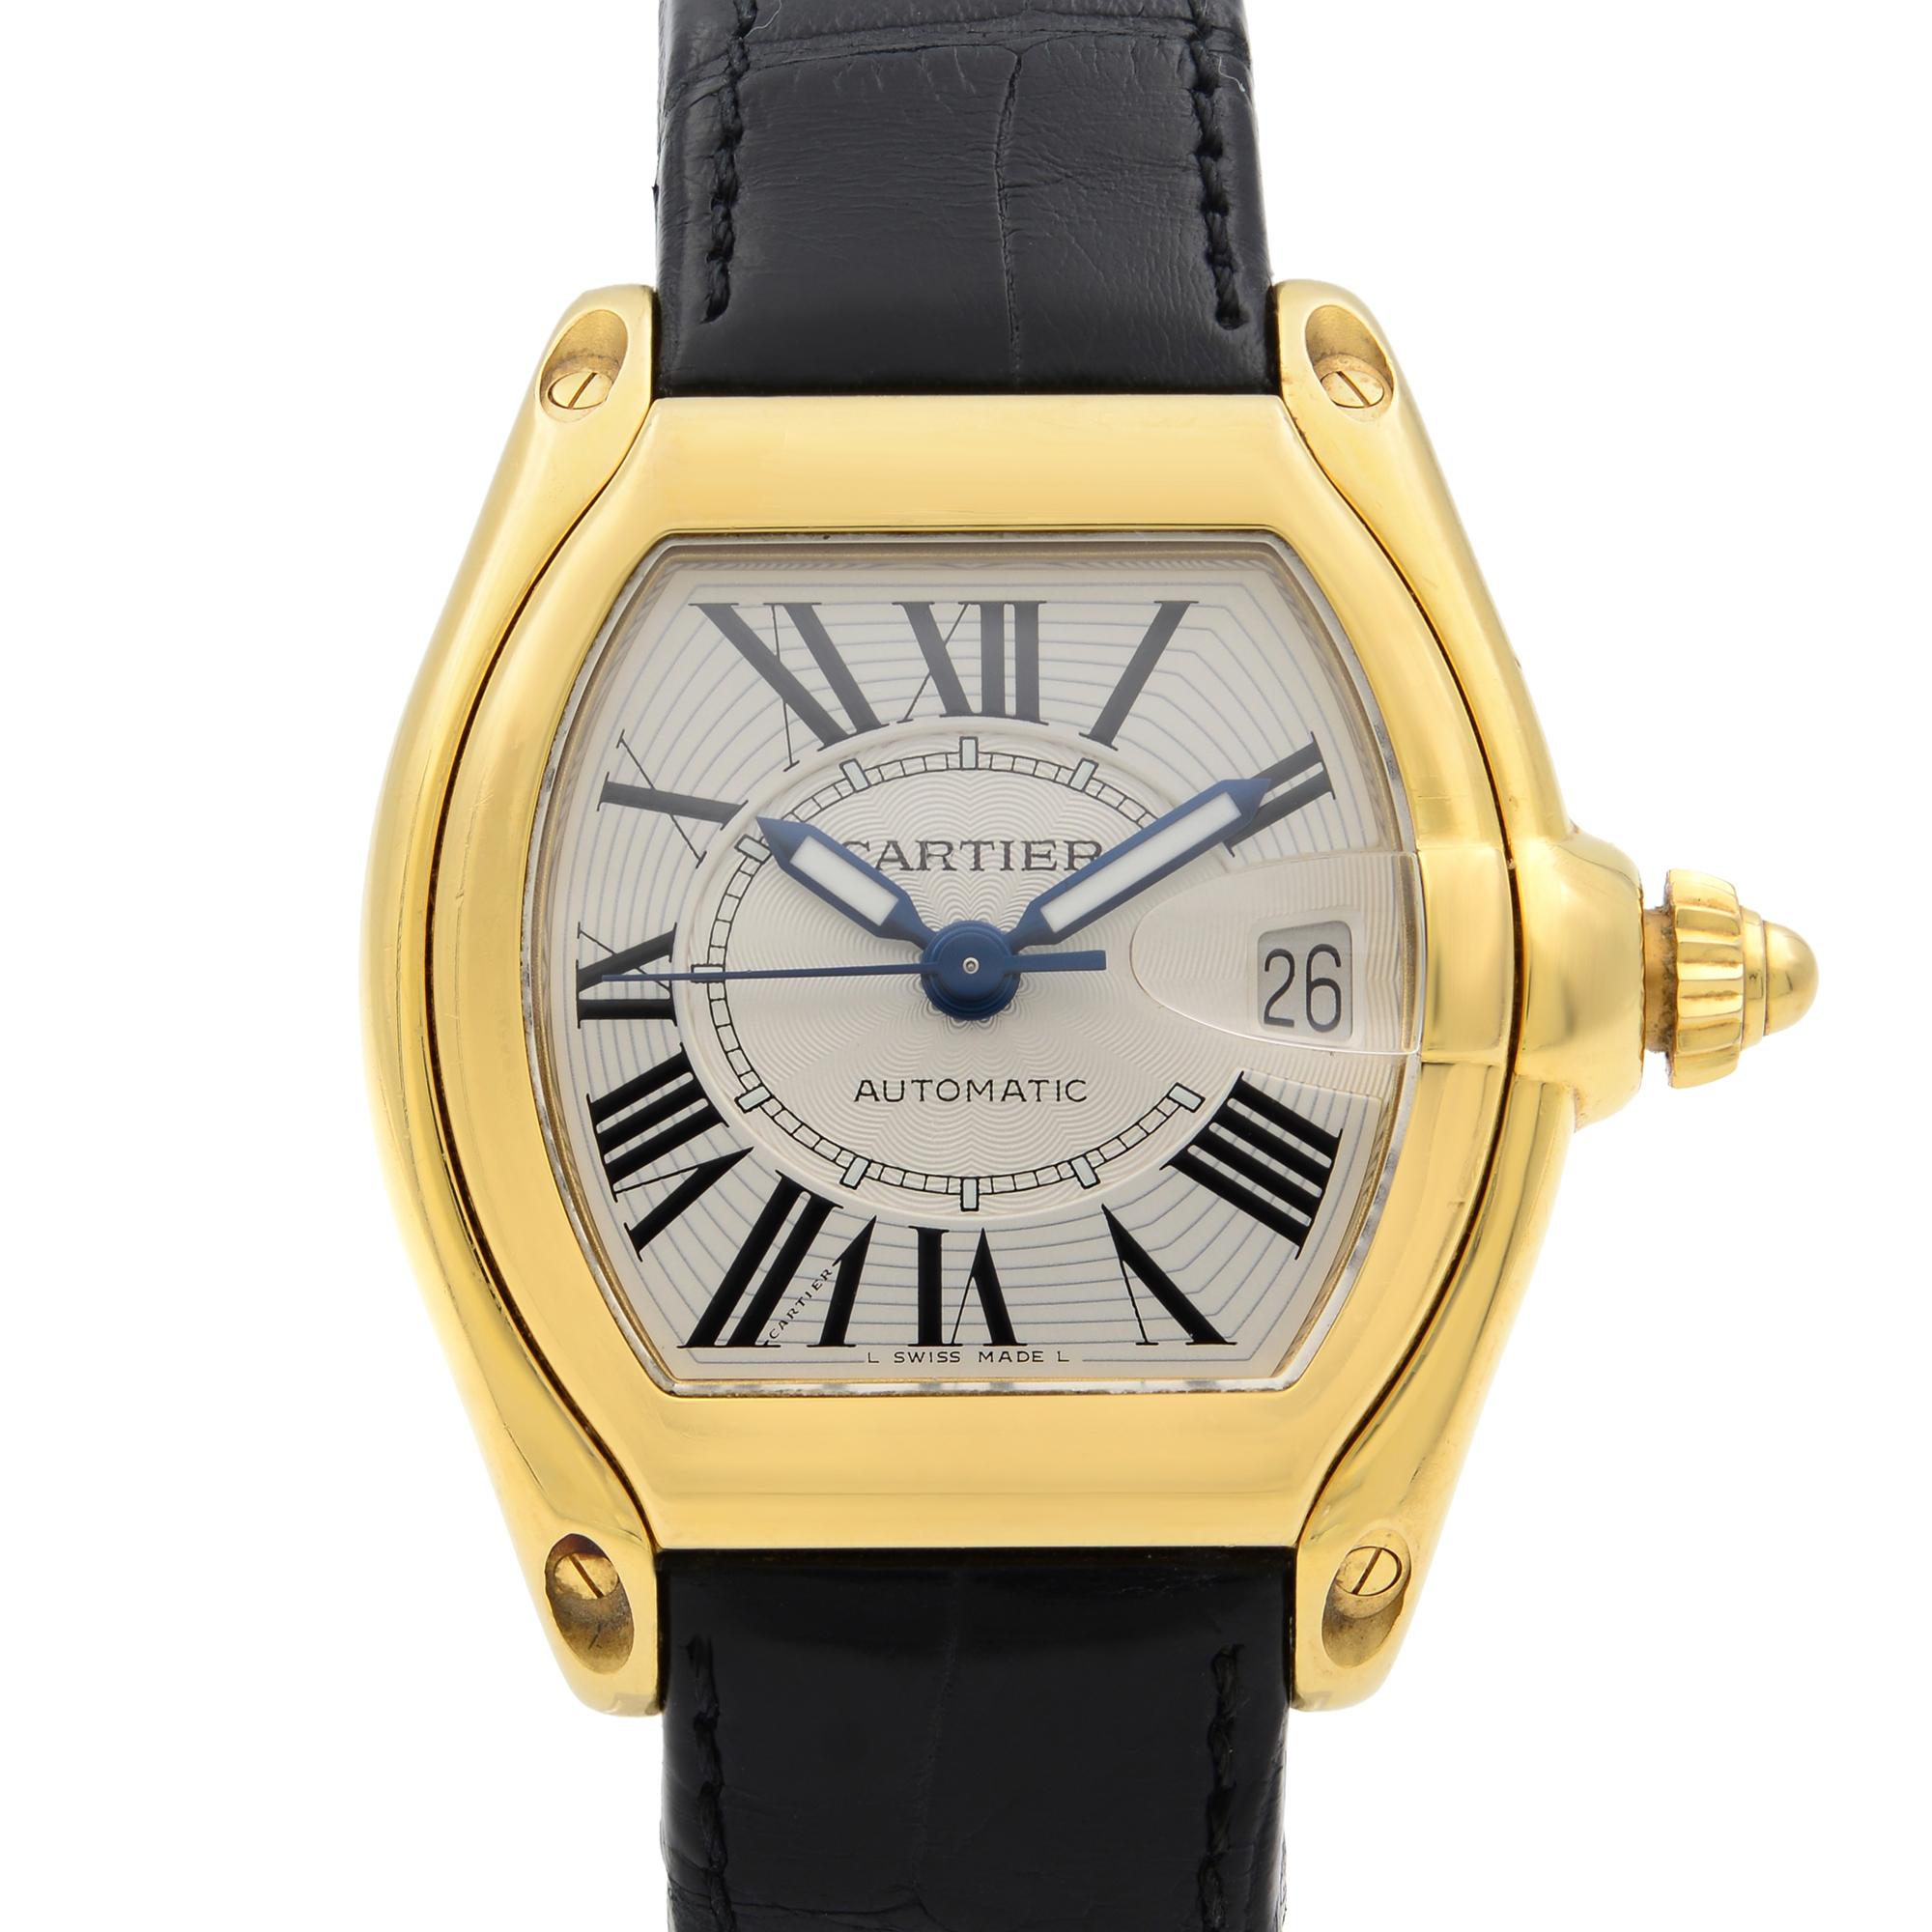 This pre-owned Cartier Roadster W62005V2 is a beautiful men's timepiece that is powered by mechanical (automatic) movement which is cased in a yellow gold case. It has a tonneau shape face, date indicator dial and has hand roman numerals style